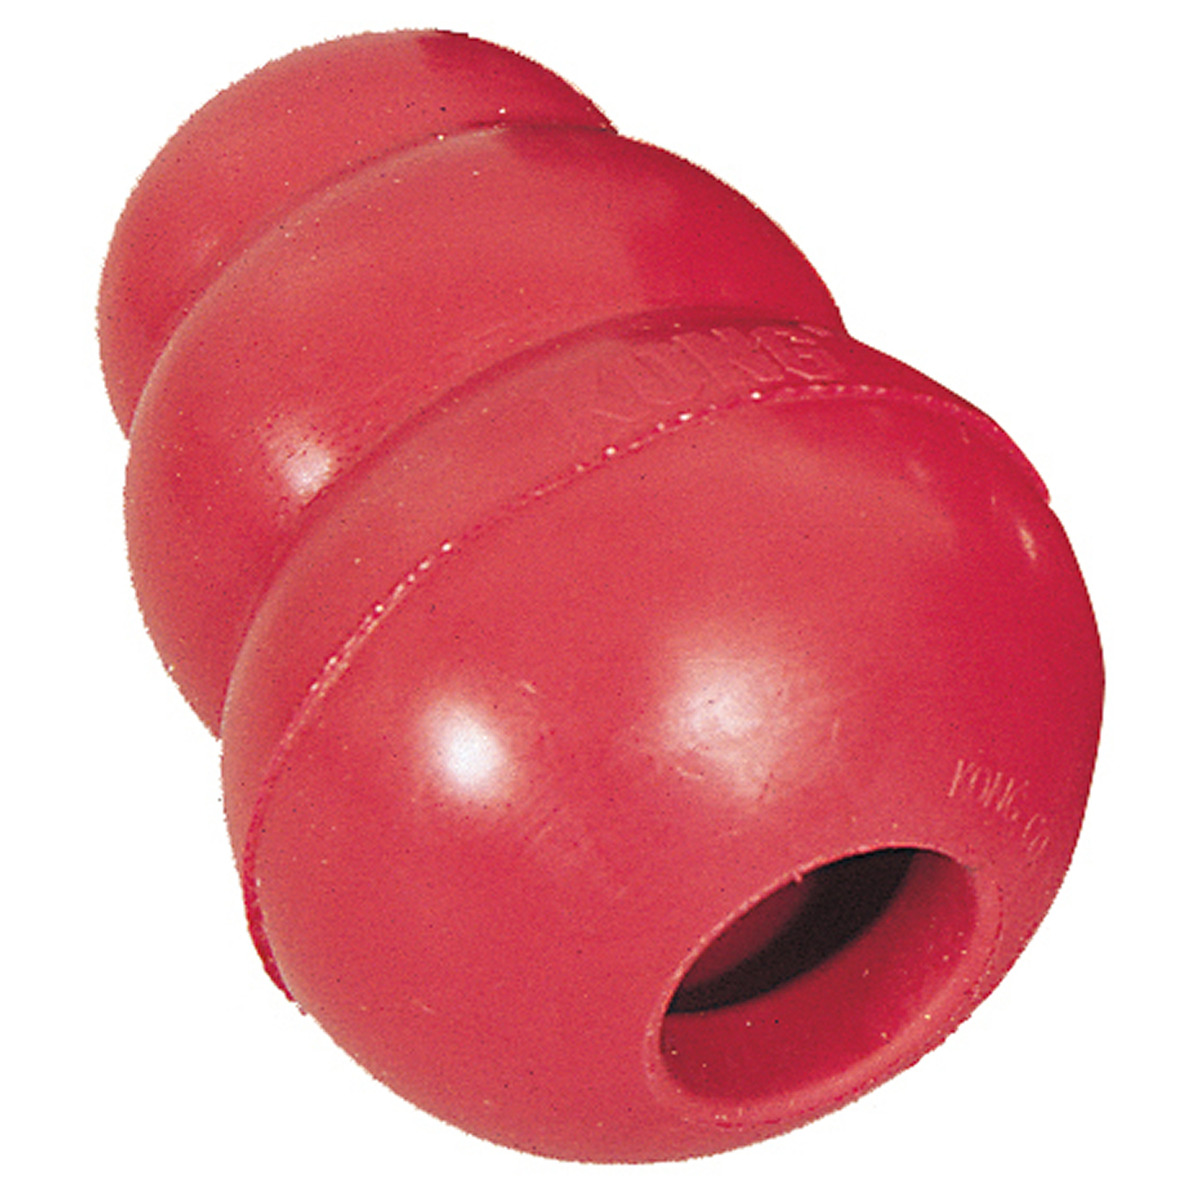 kong-classic-dog-chew-toy-small-red